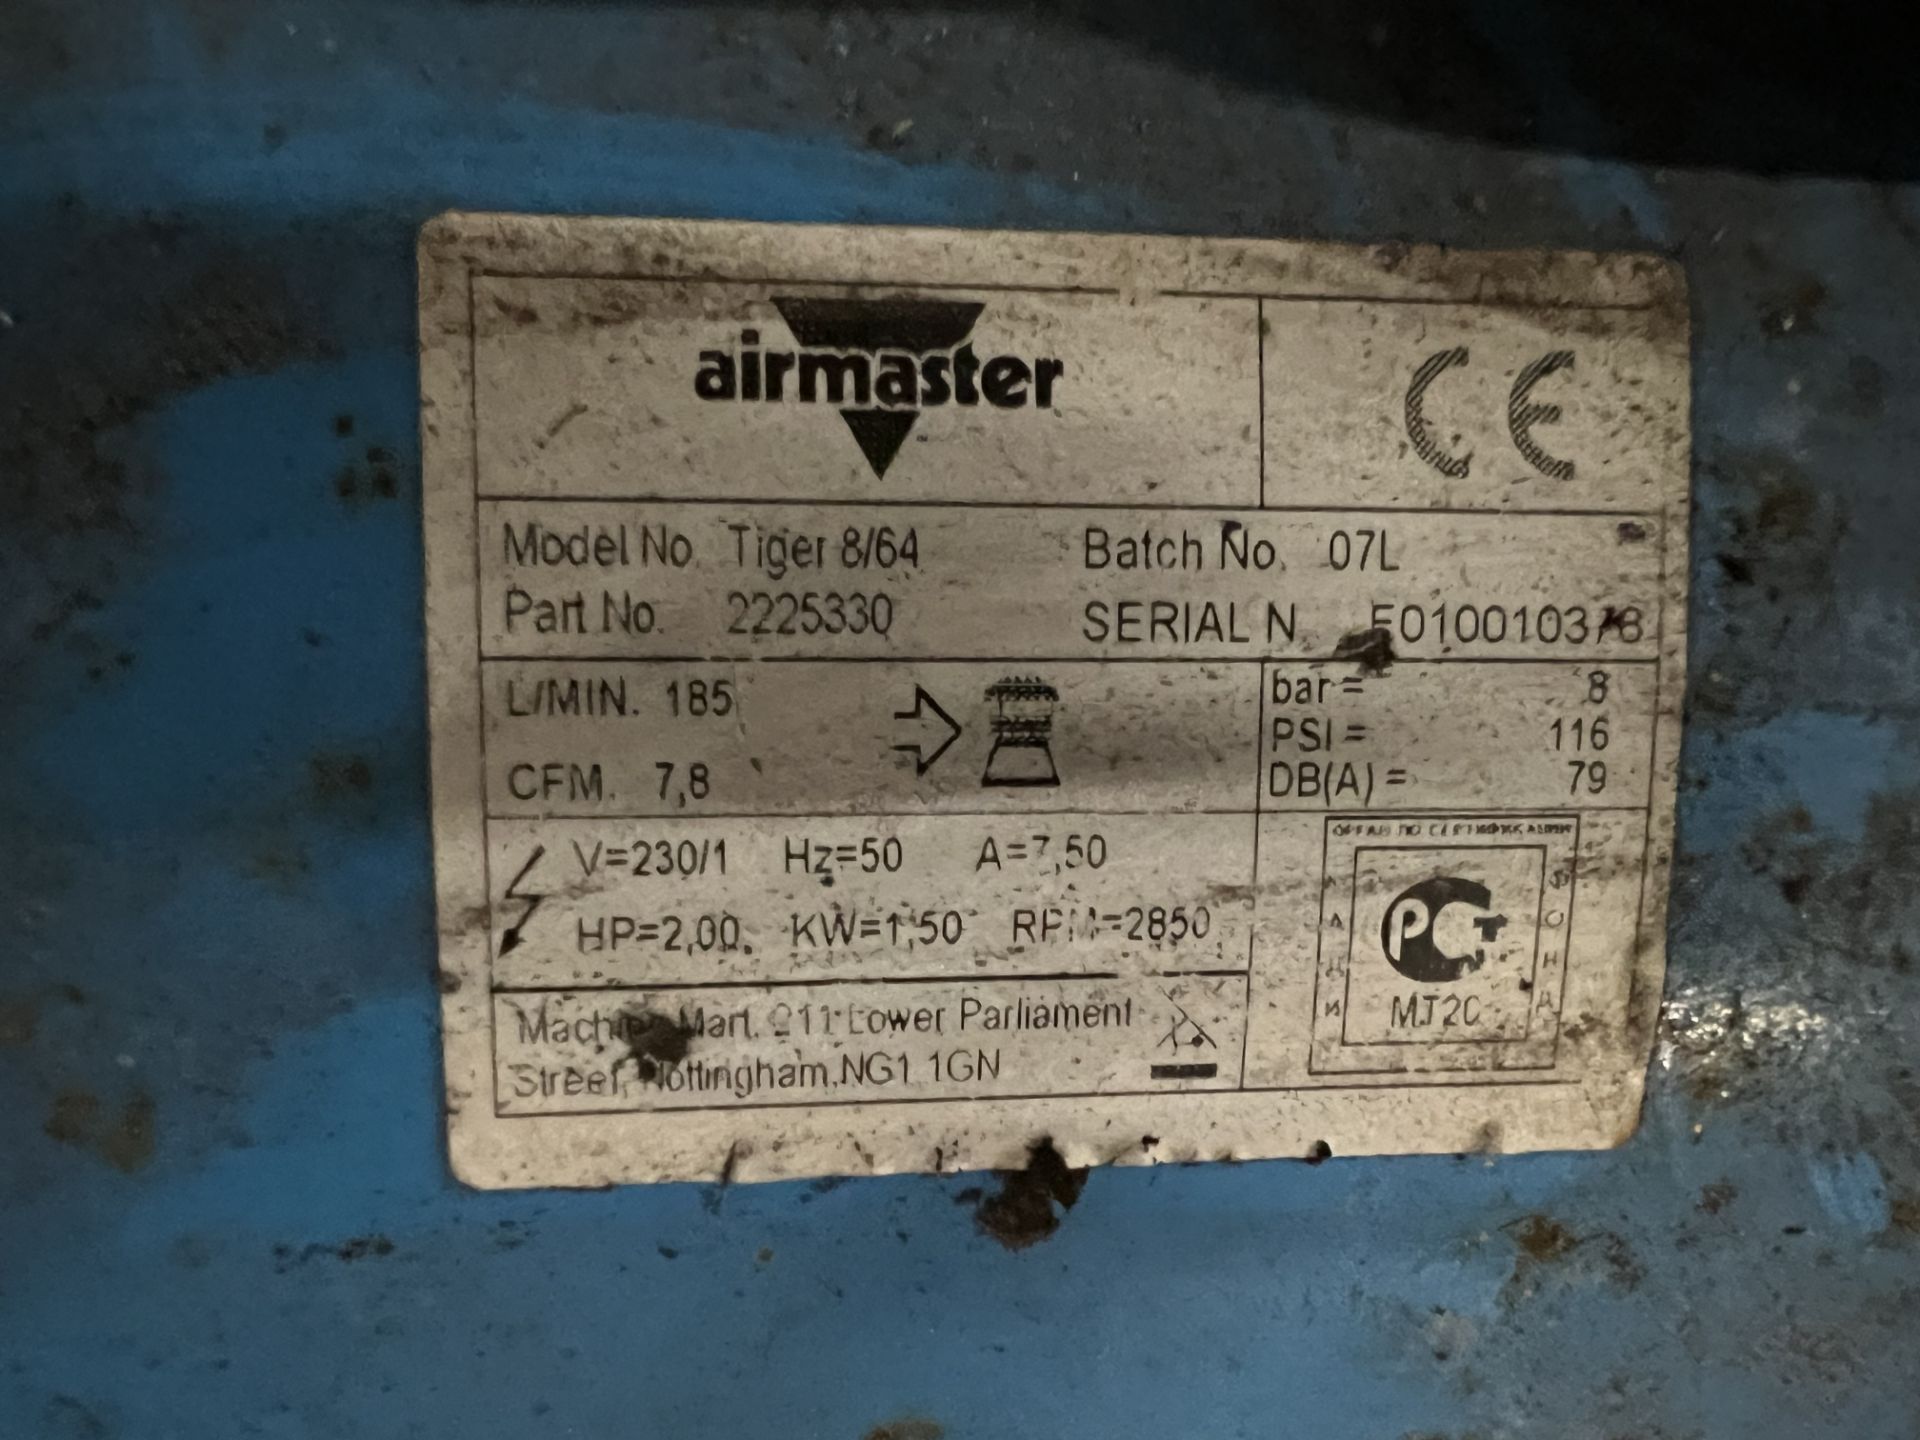 Airmaster Tiger 8/64 Turbo Compressor, lift out charge - £20 + VAT, lot located in Bury St - Image 2 of 3